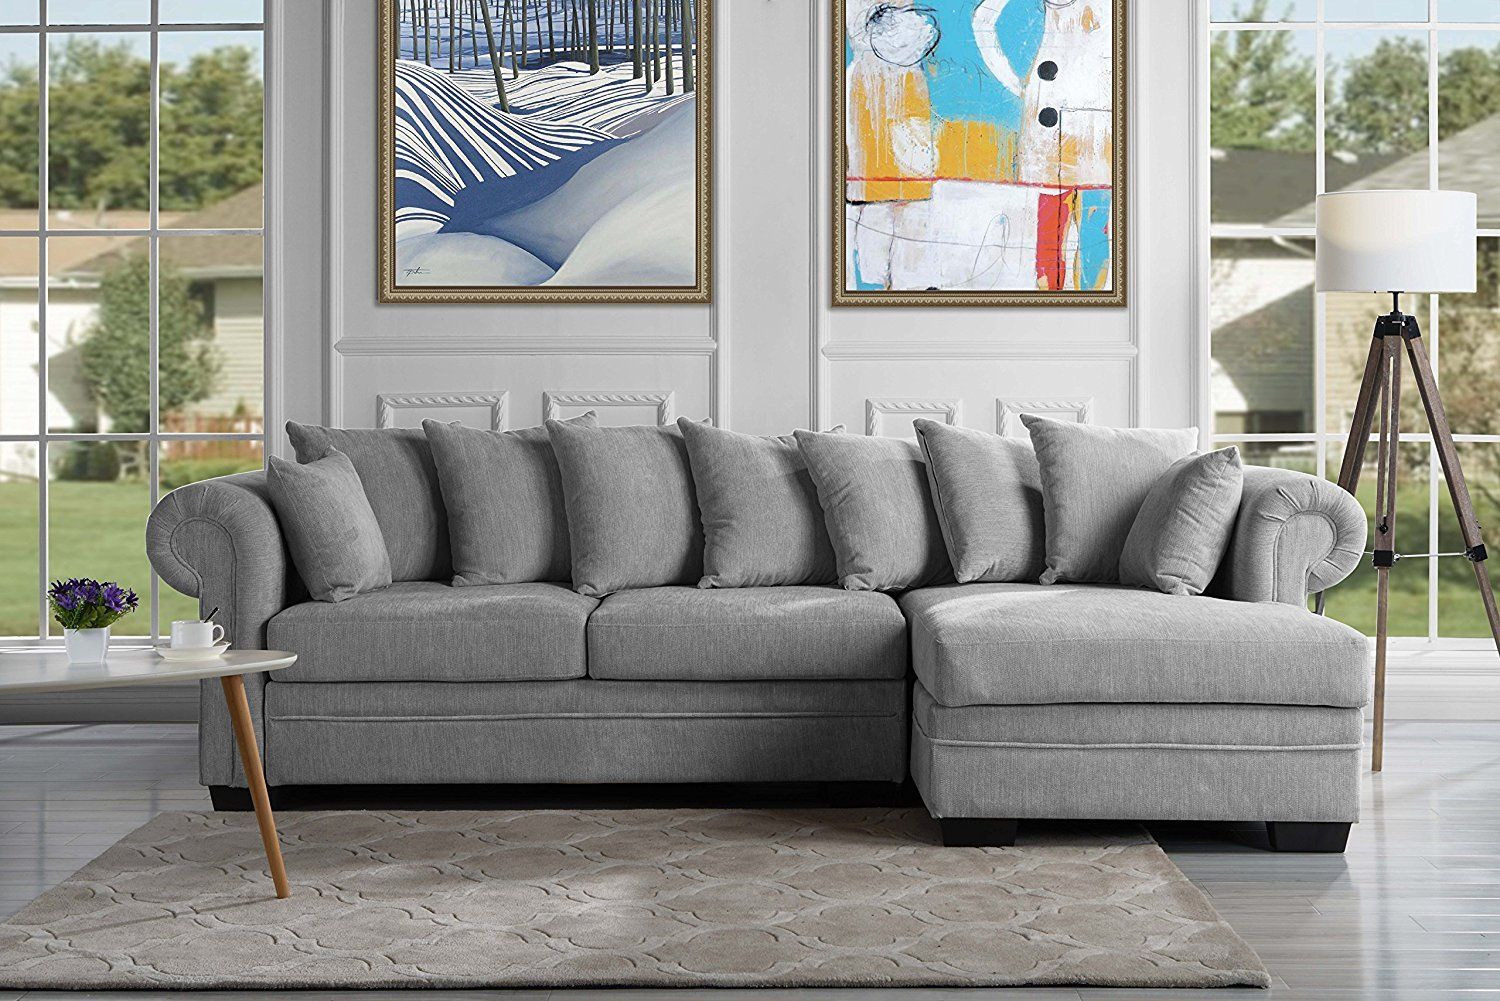 Modern Large Sectional Sofa, L Shape Couch W/ Extra Wide Chaise, Light Intended For Sofas In Light Gray (View 18 of 22)